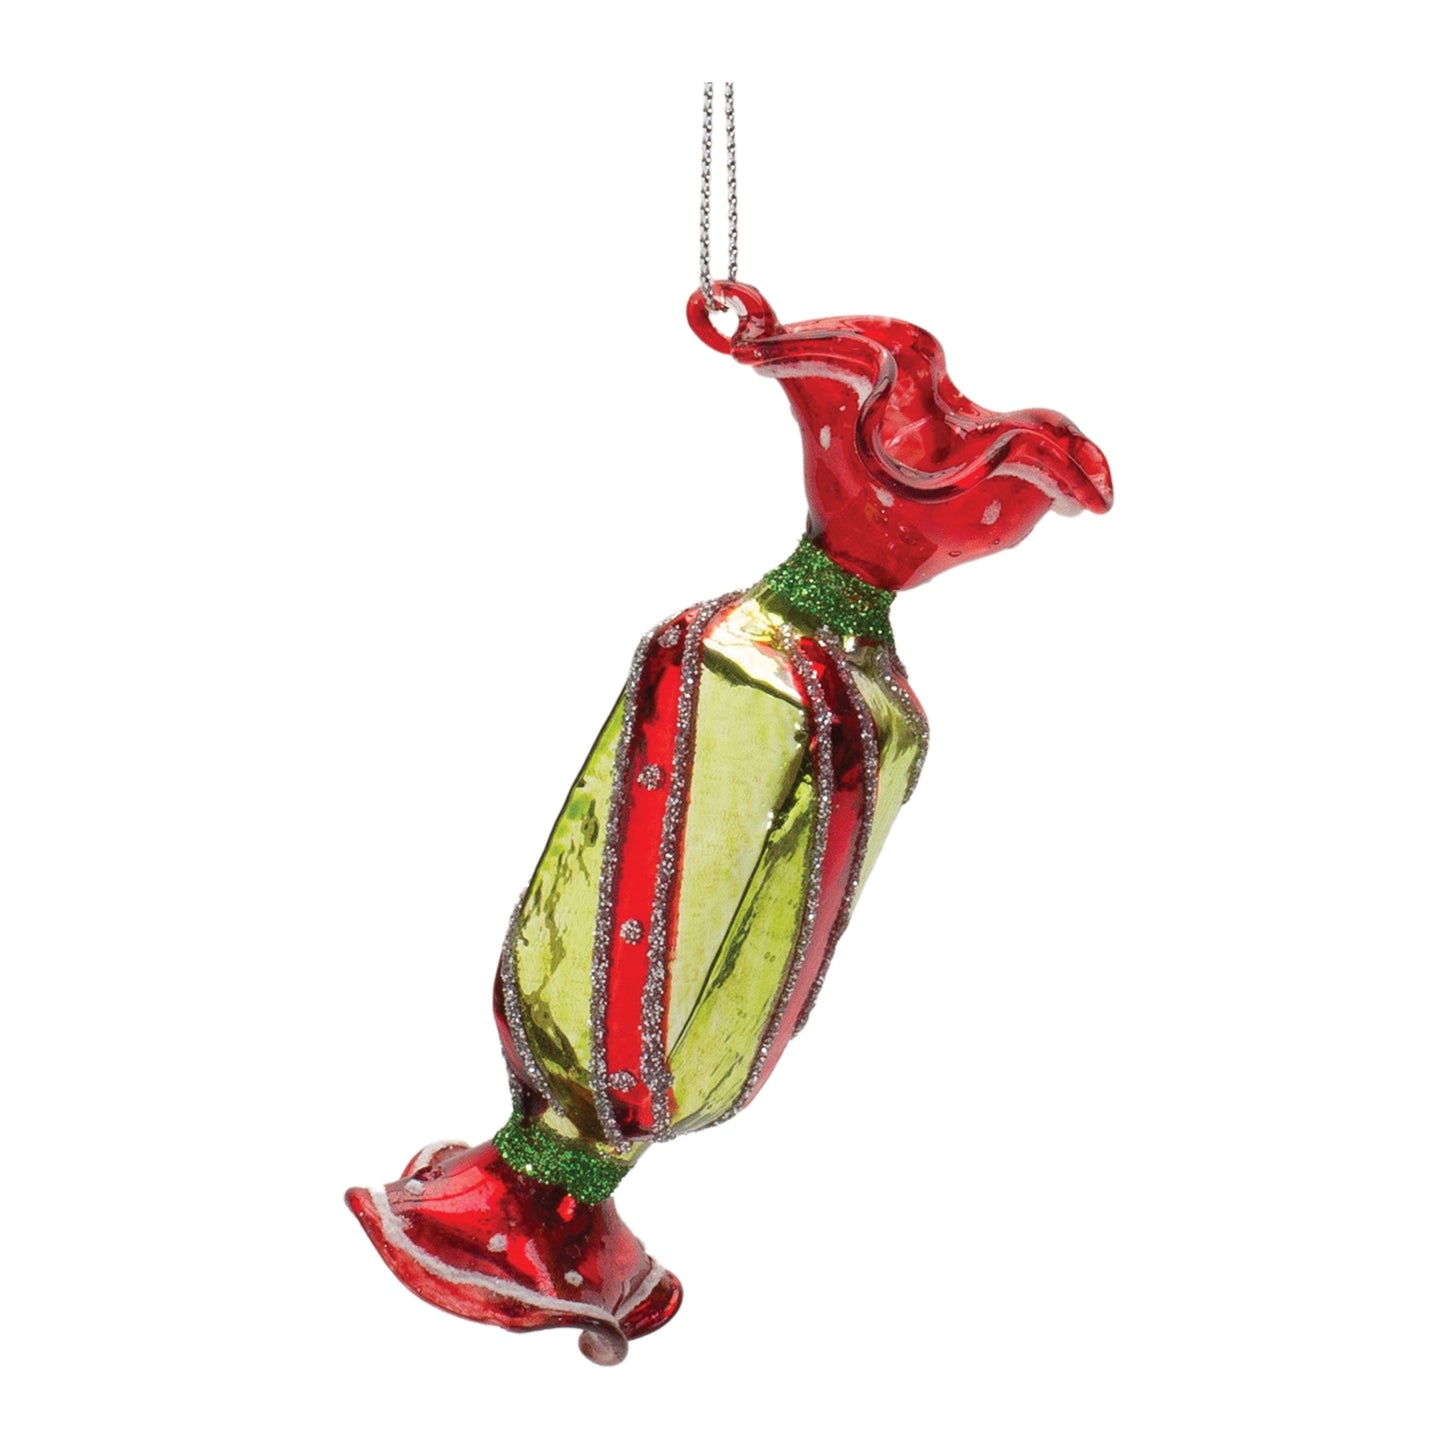 Candy Ornaments by Melrose Intl